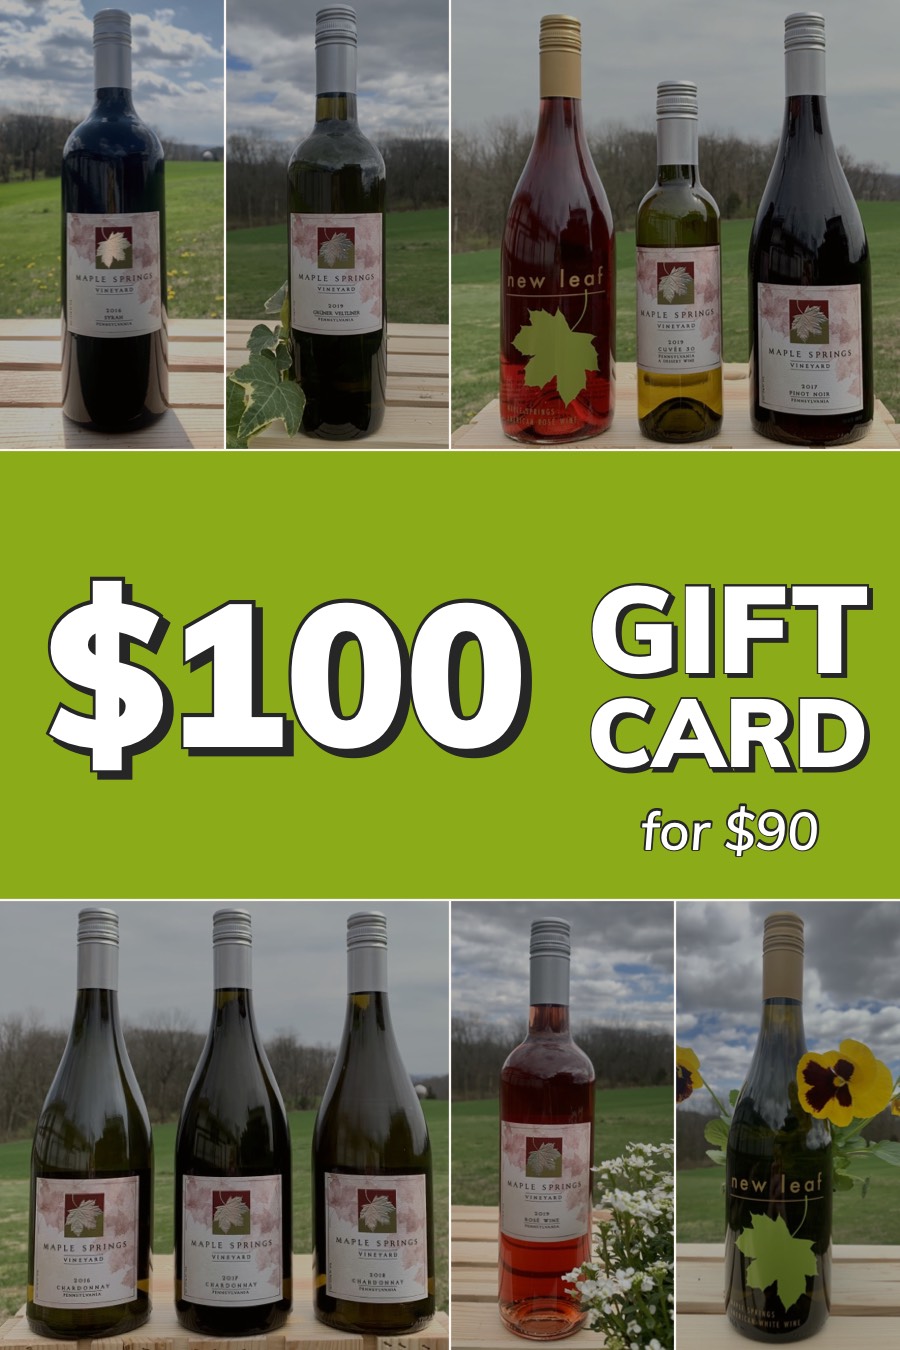 Product Image for Gift Card - $100